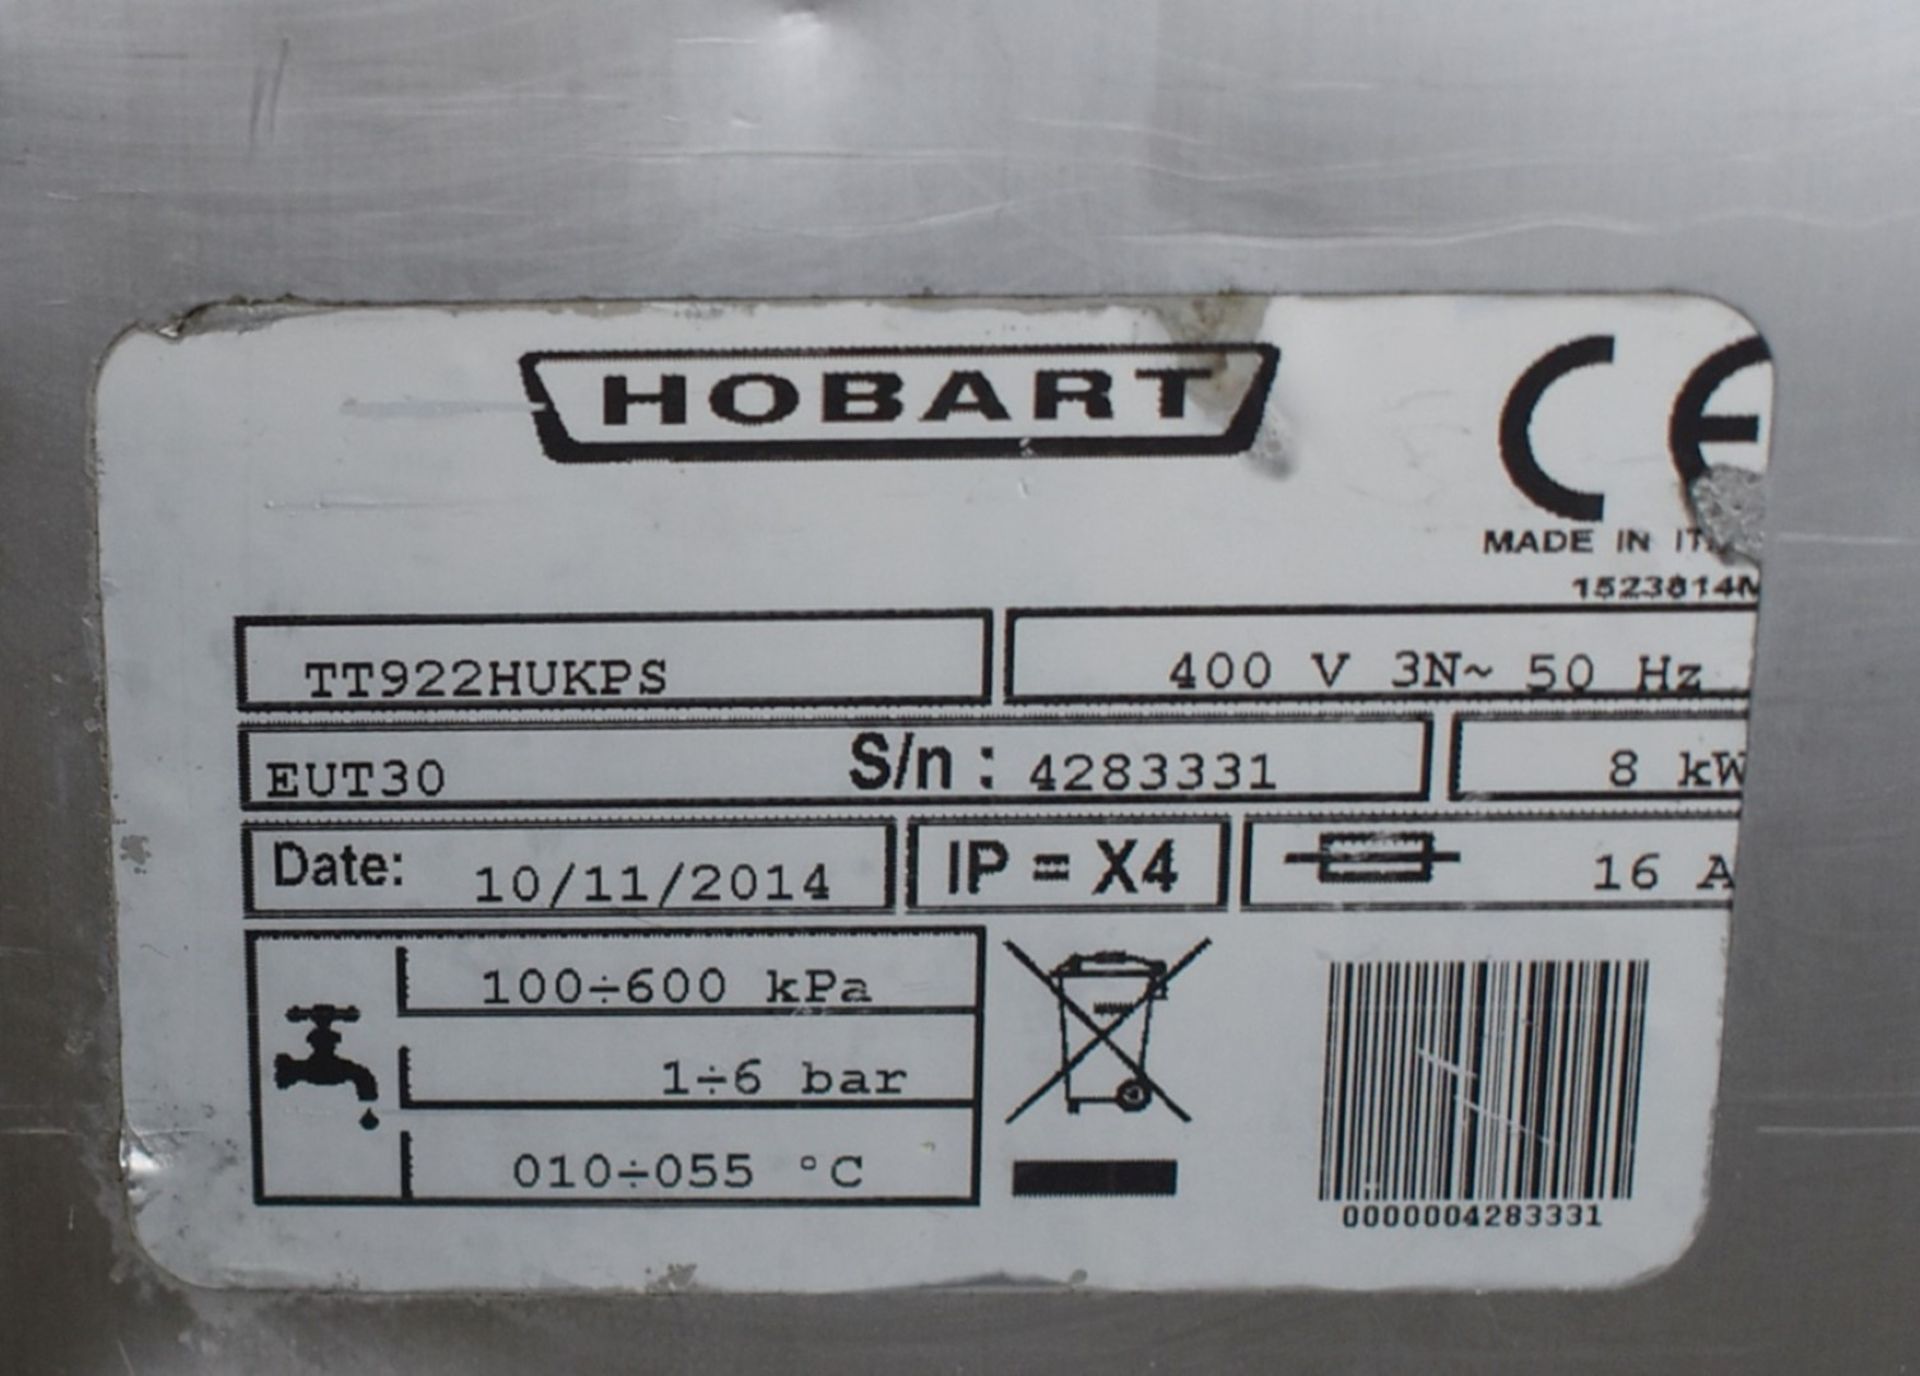 1 x Hobart Upright Heavy Duty Dishwasher For Oven Trays / Cooking Pans - 3 Phase - RRP £17,000! - Image 5 of 14